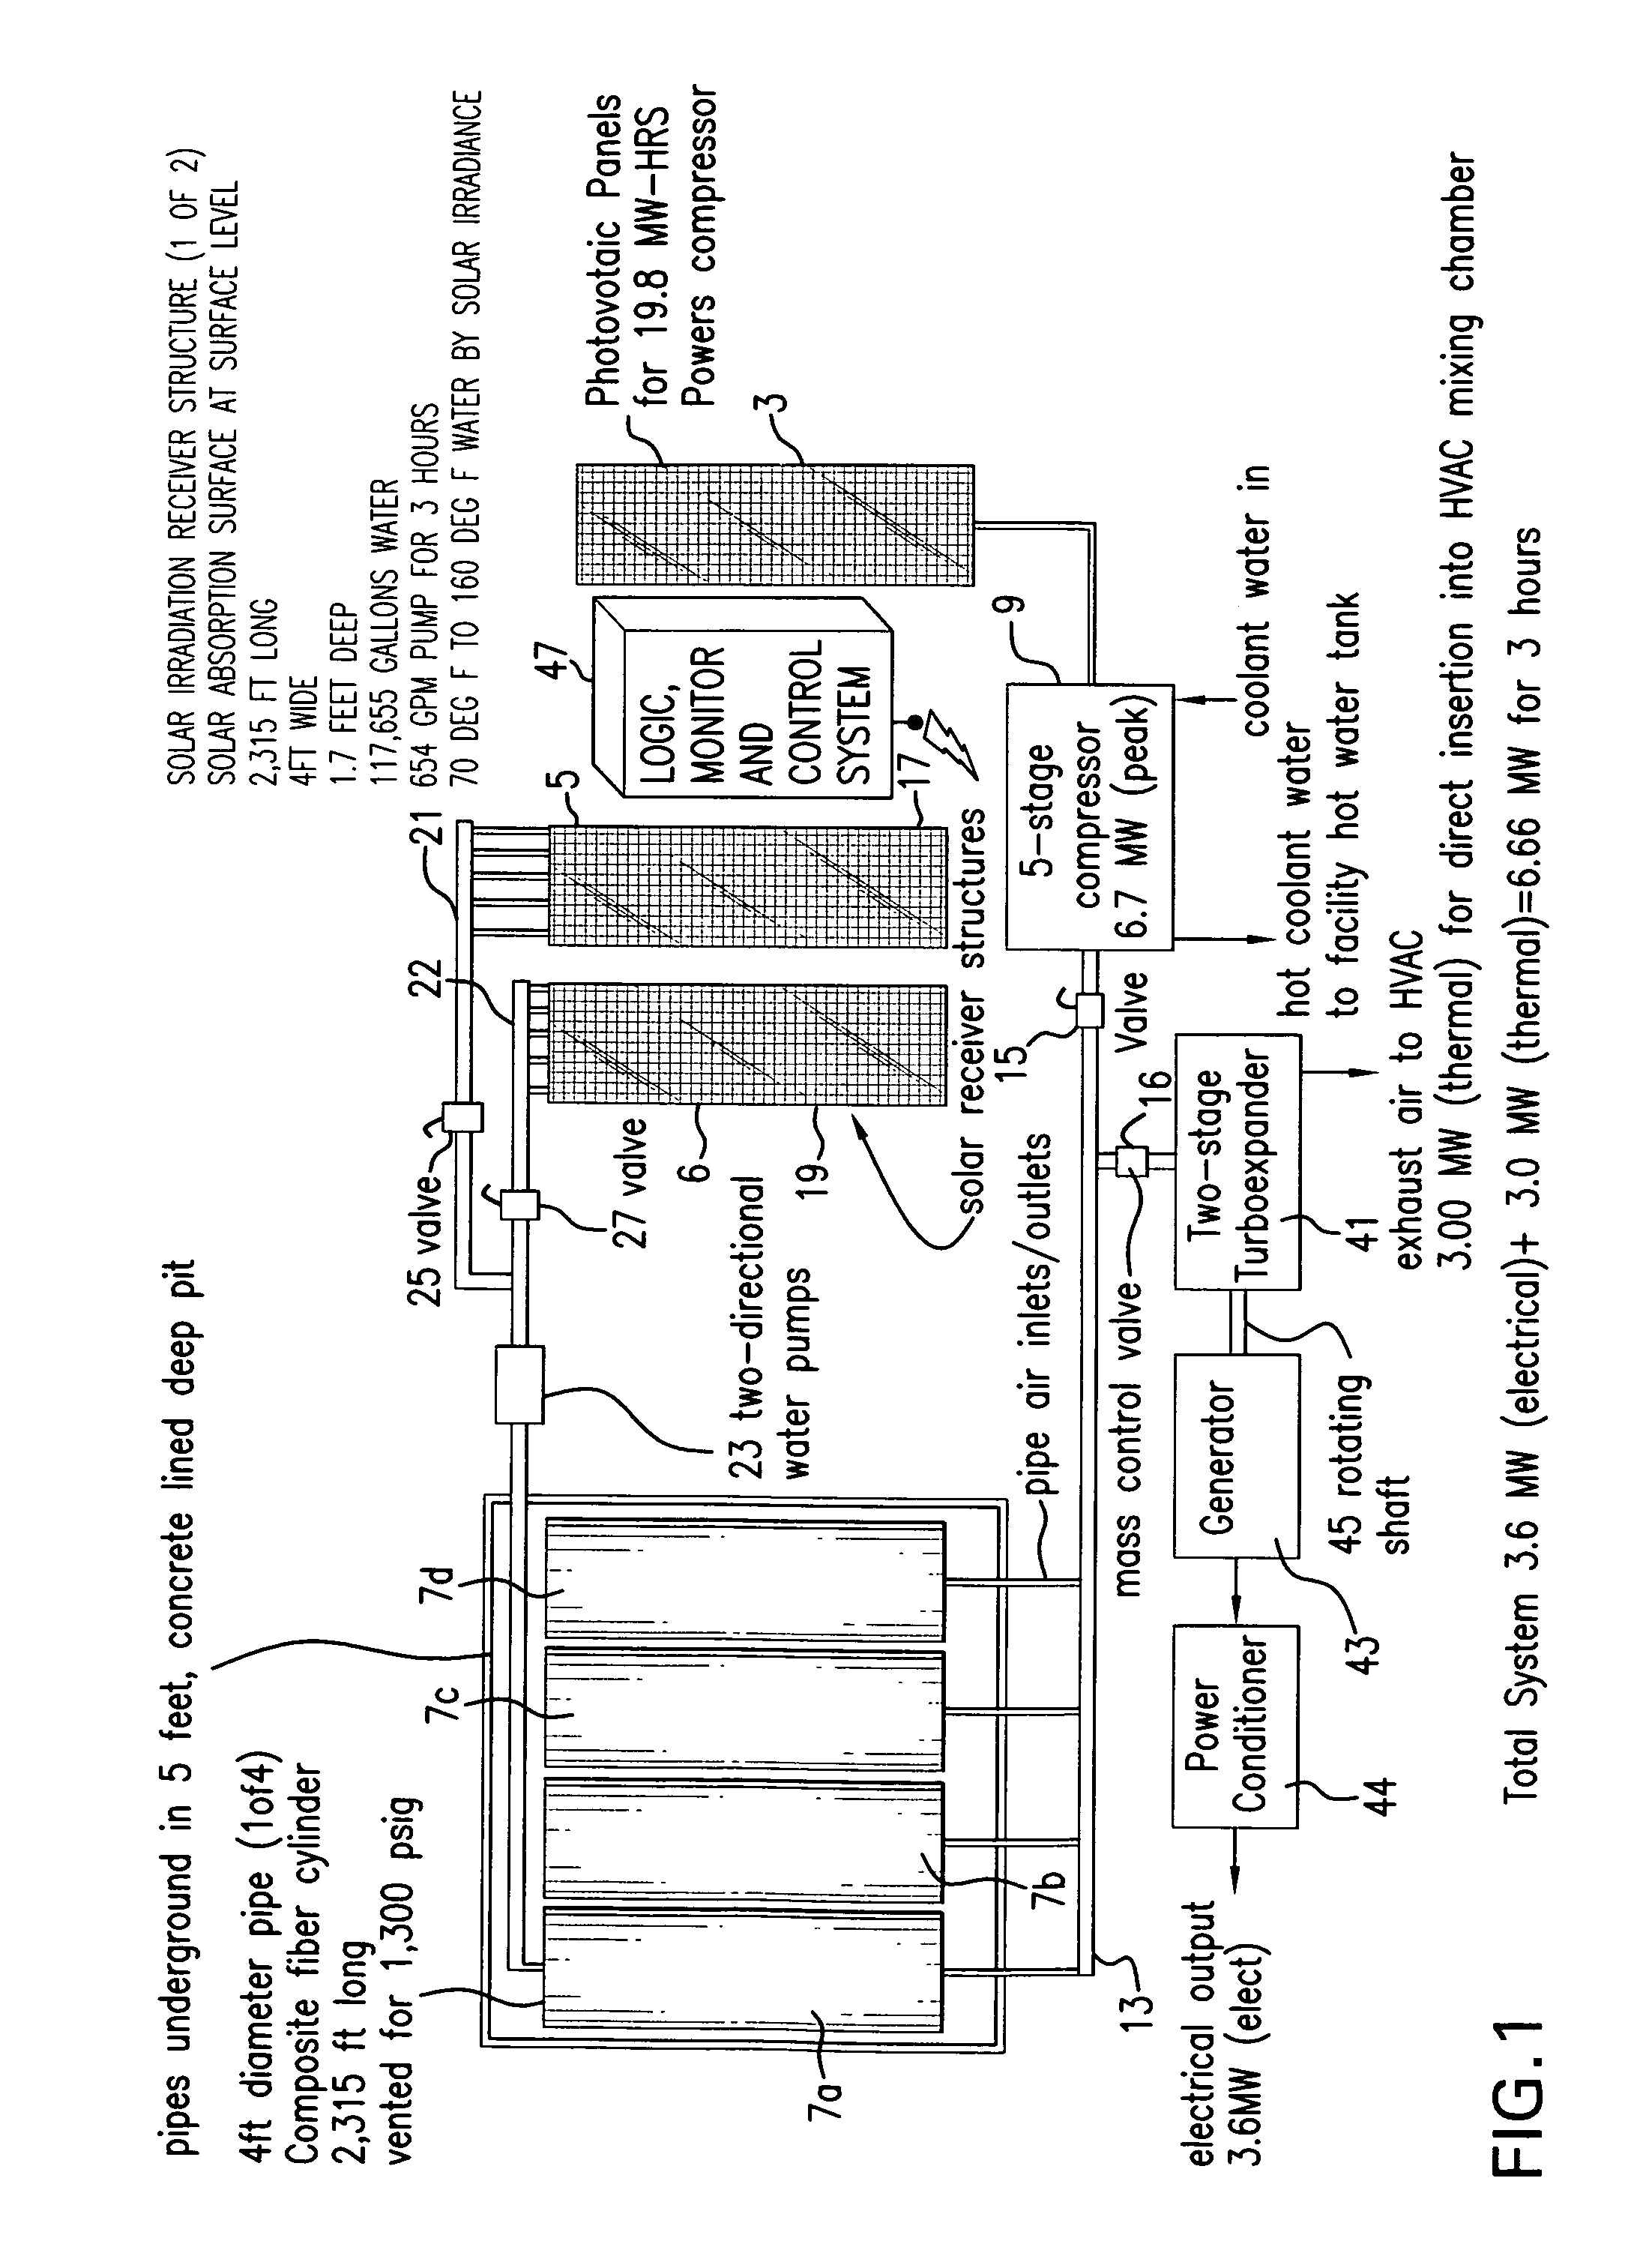 Method and apparatus for using solar energy to enhance the operation of a compressed air energy storage system